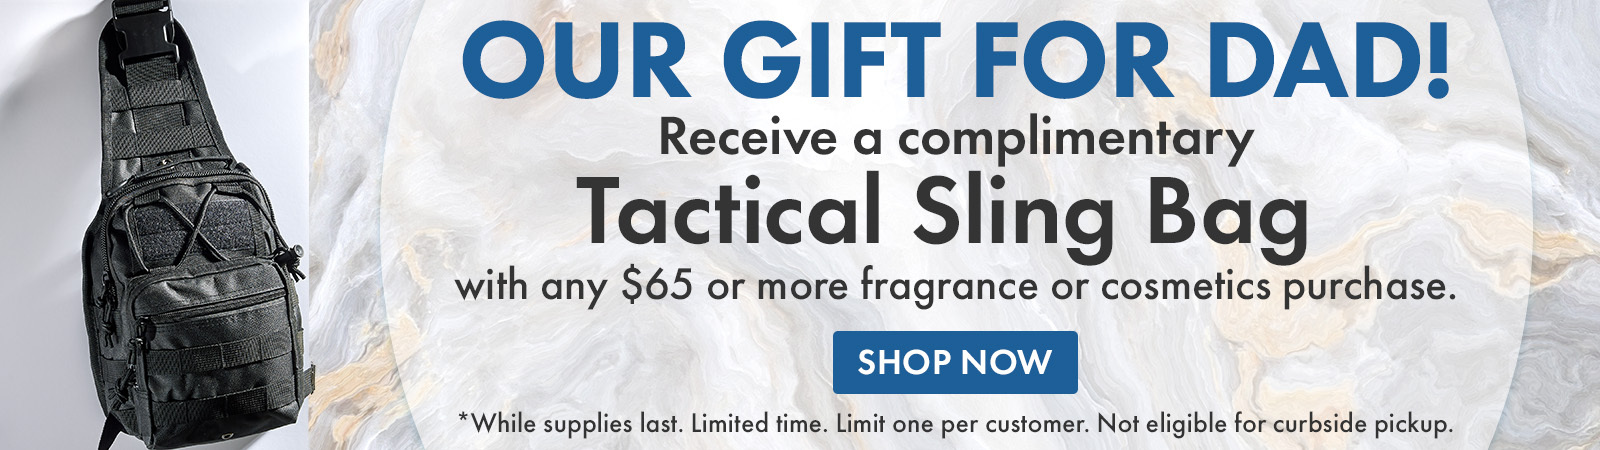 FREE Tactical Sling Bag with any $65 or more fragrance or cosmetics purchase